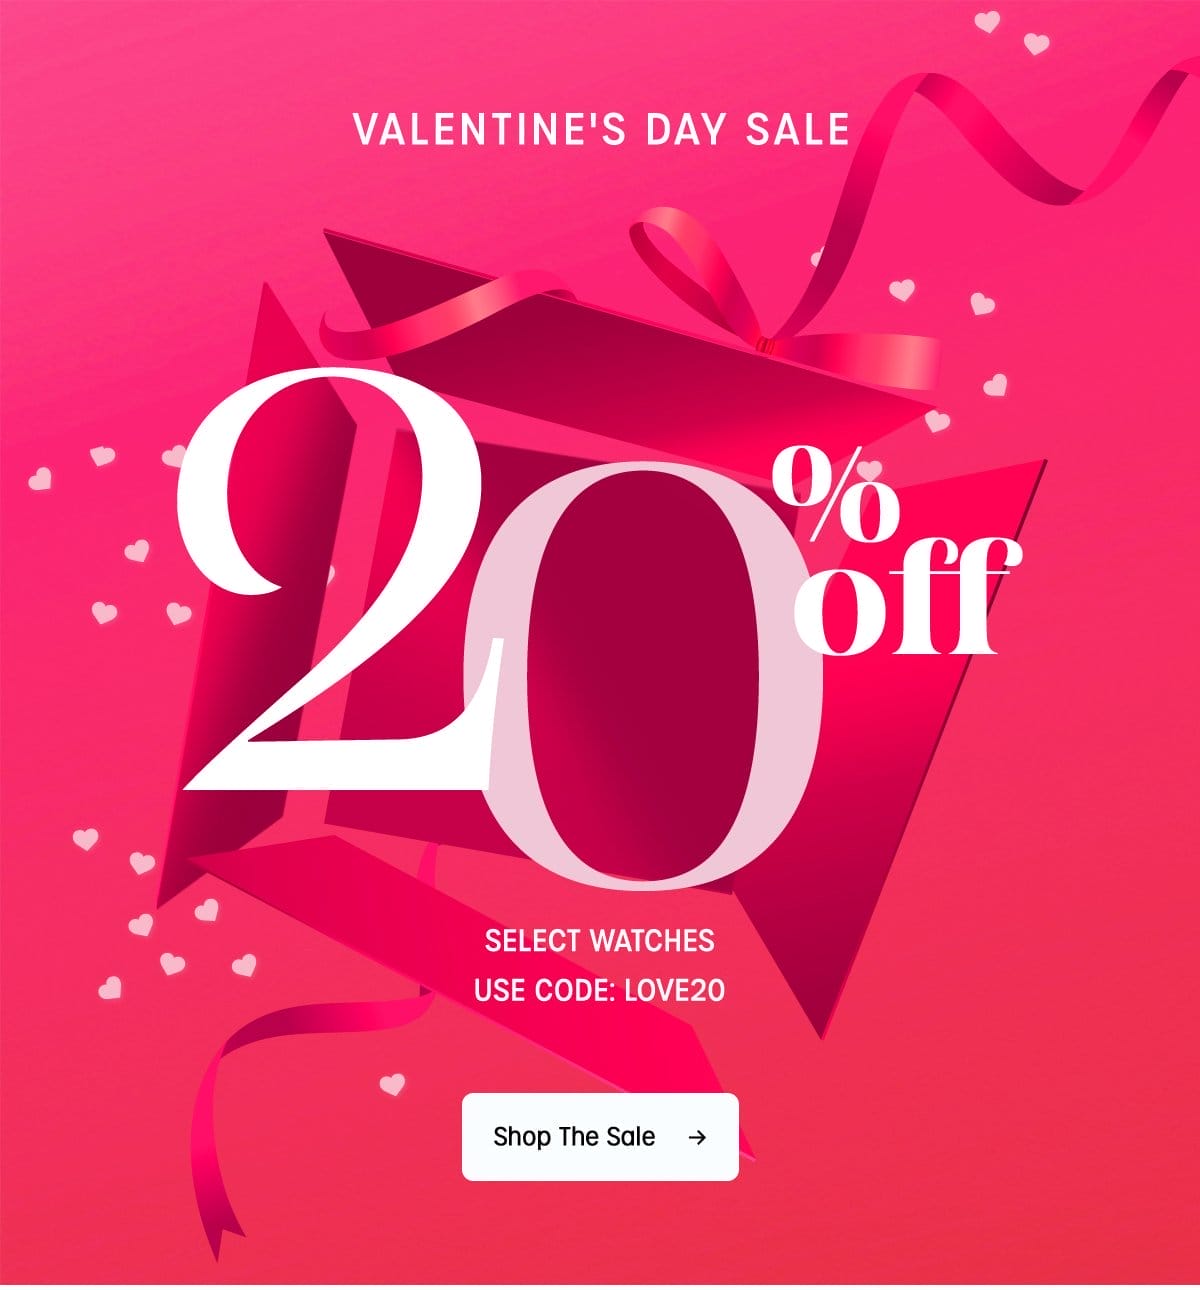 VALENTINE'S DAY SALE | 20% OFF SELECT WATCHES | USE CODE: LOVE20 | Shop The Sale